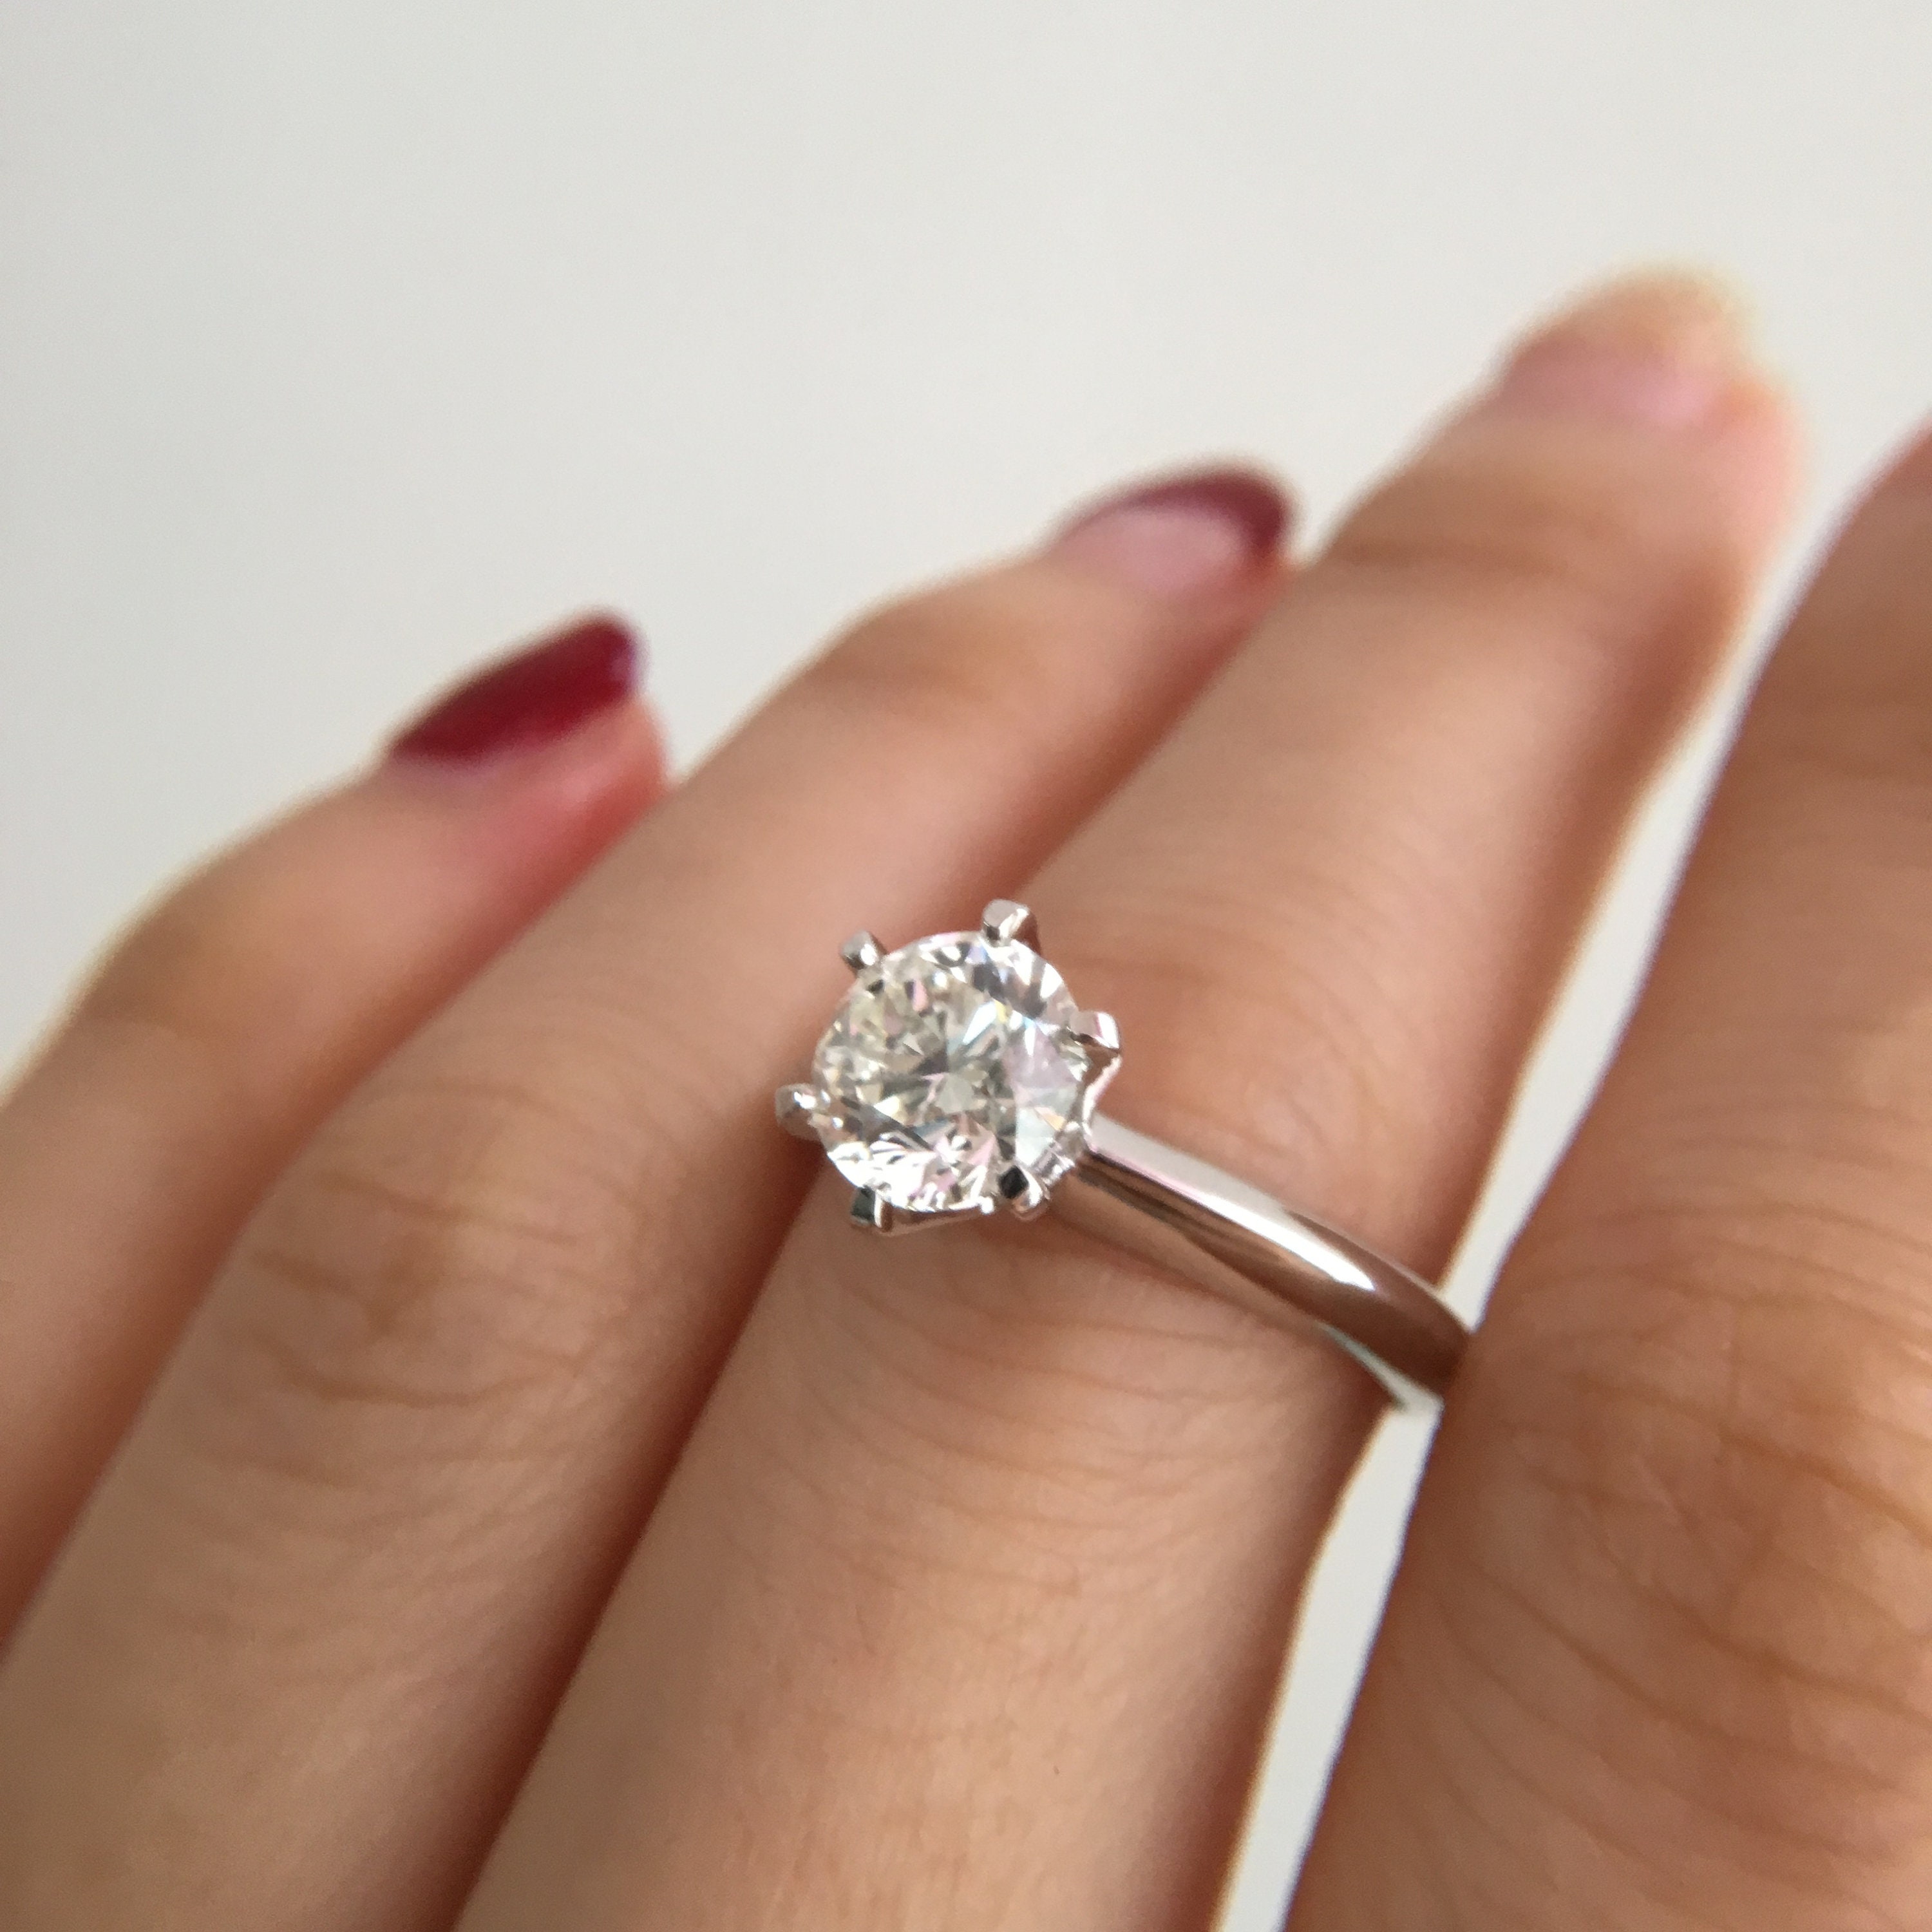 5 карат. Муассанит 5 карат. Муассанит 3,5 карат. Муассанит 1 карат. Moissanite Engagement Rings.